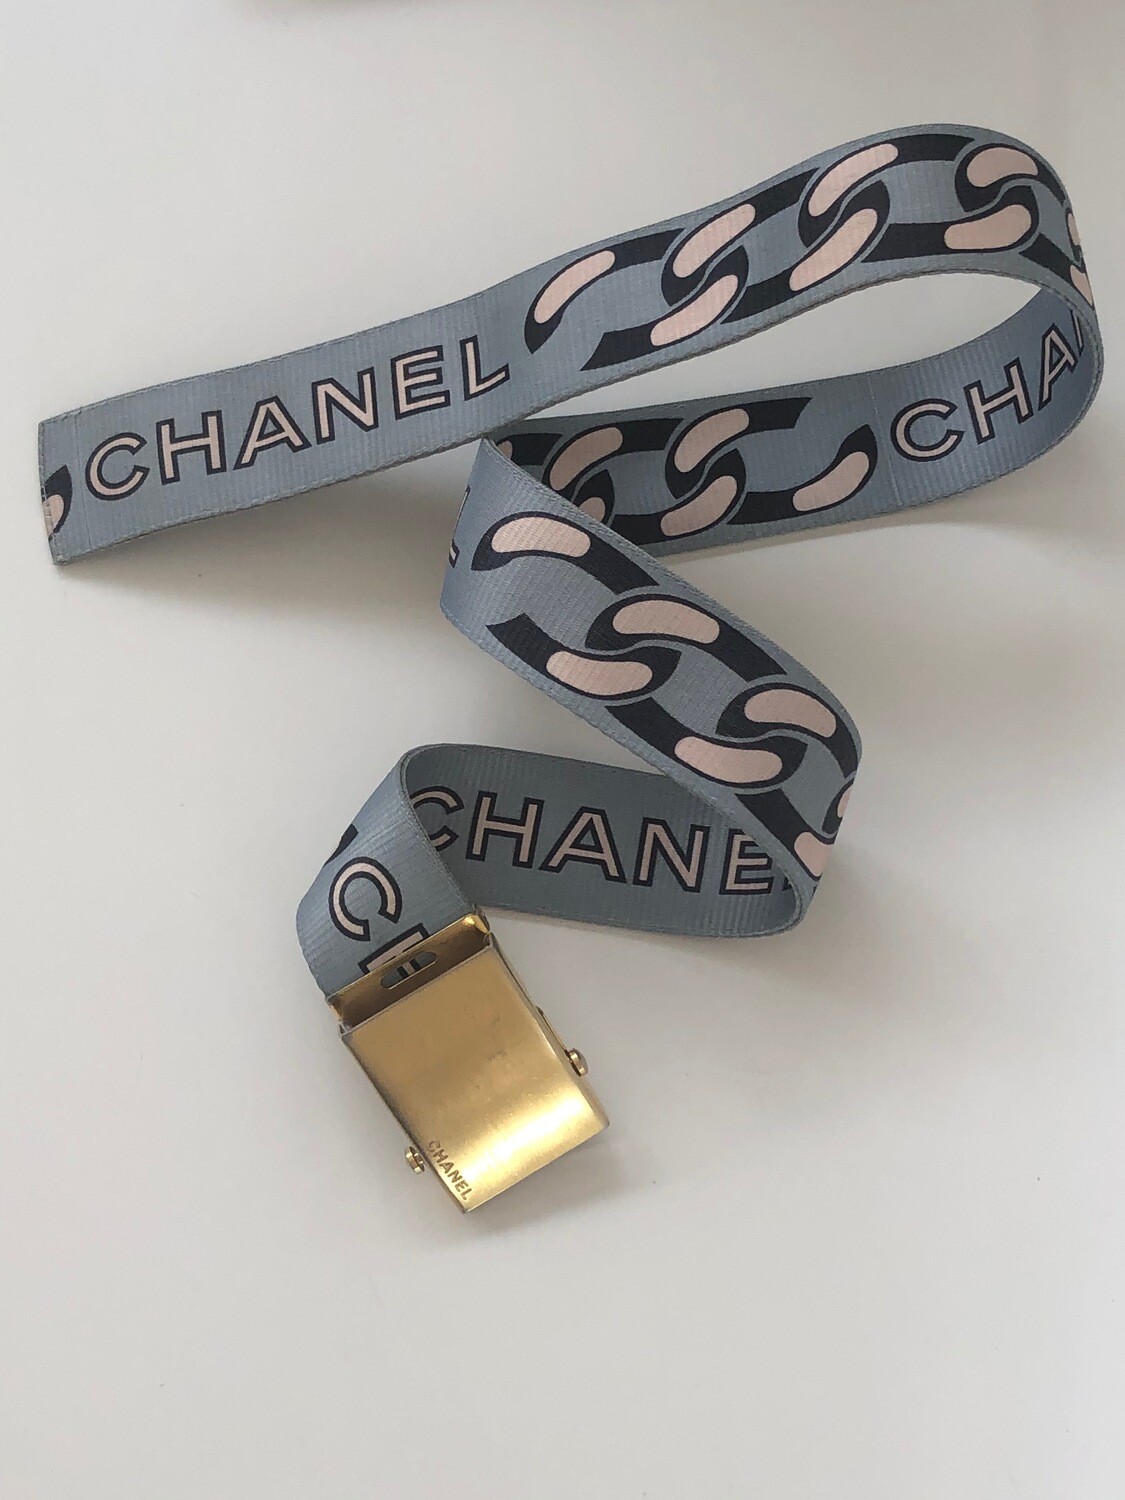 VINTAGE CHANEL CHAIN PRINT LOGO WEBBING BELT WITH GOLD BUCKLE